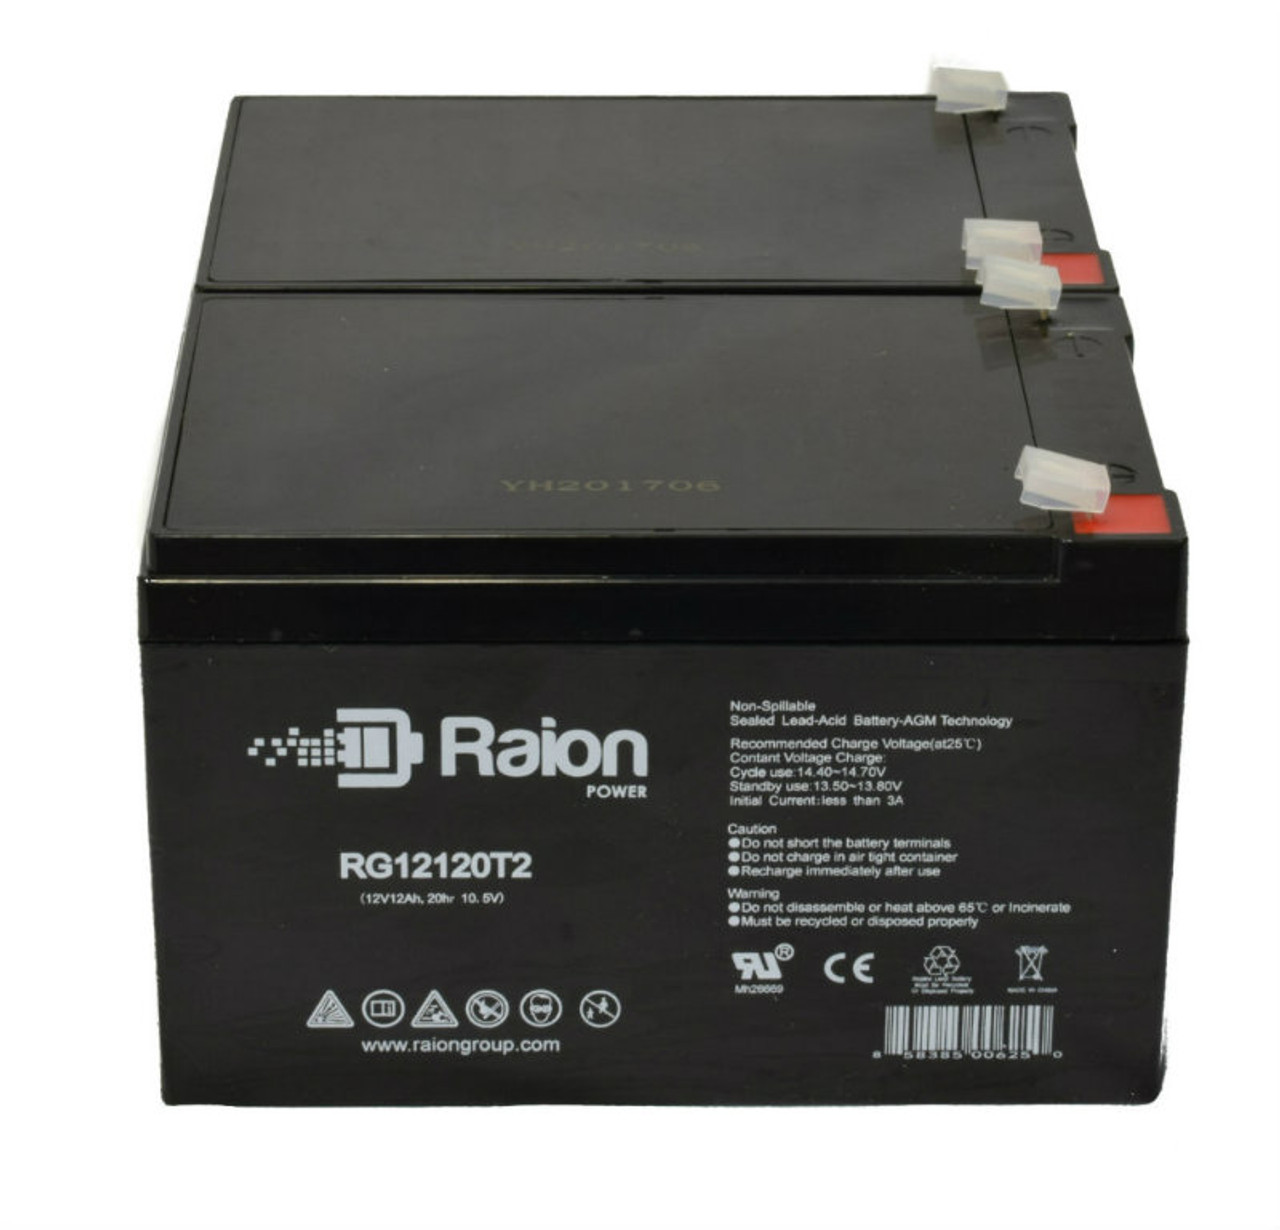 Raion Power 12V 12Ah Non-Spillable Compatible Replacement Battery for Shoprider Scootie TE-787NA - (2 Pack)